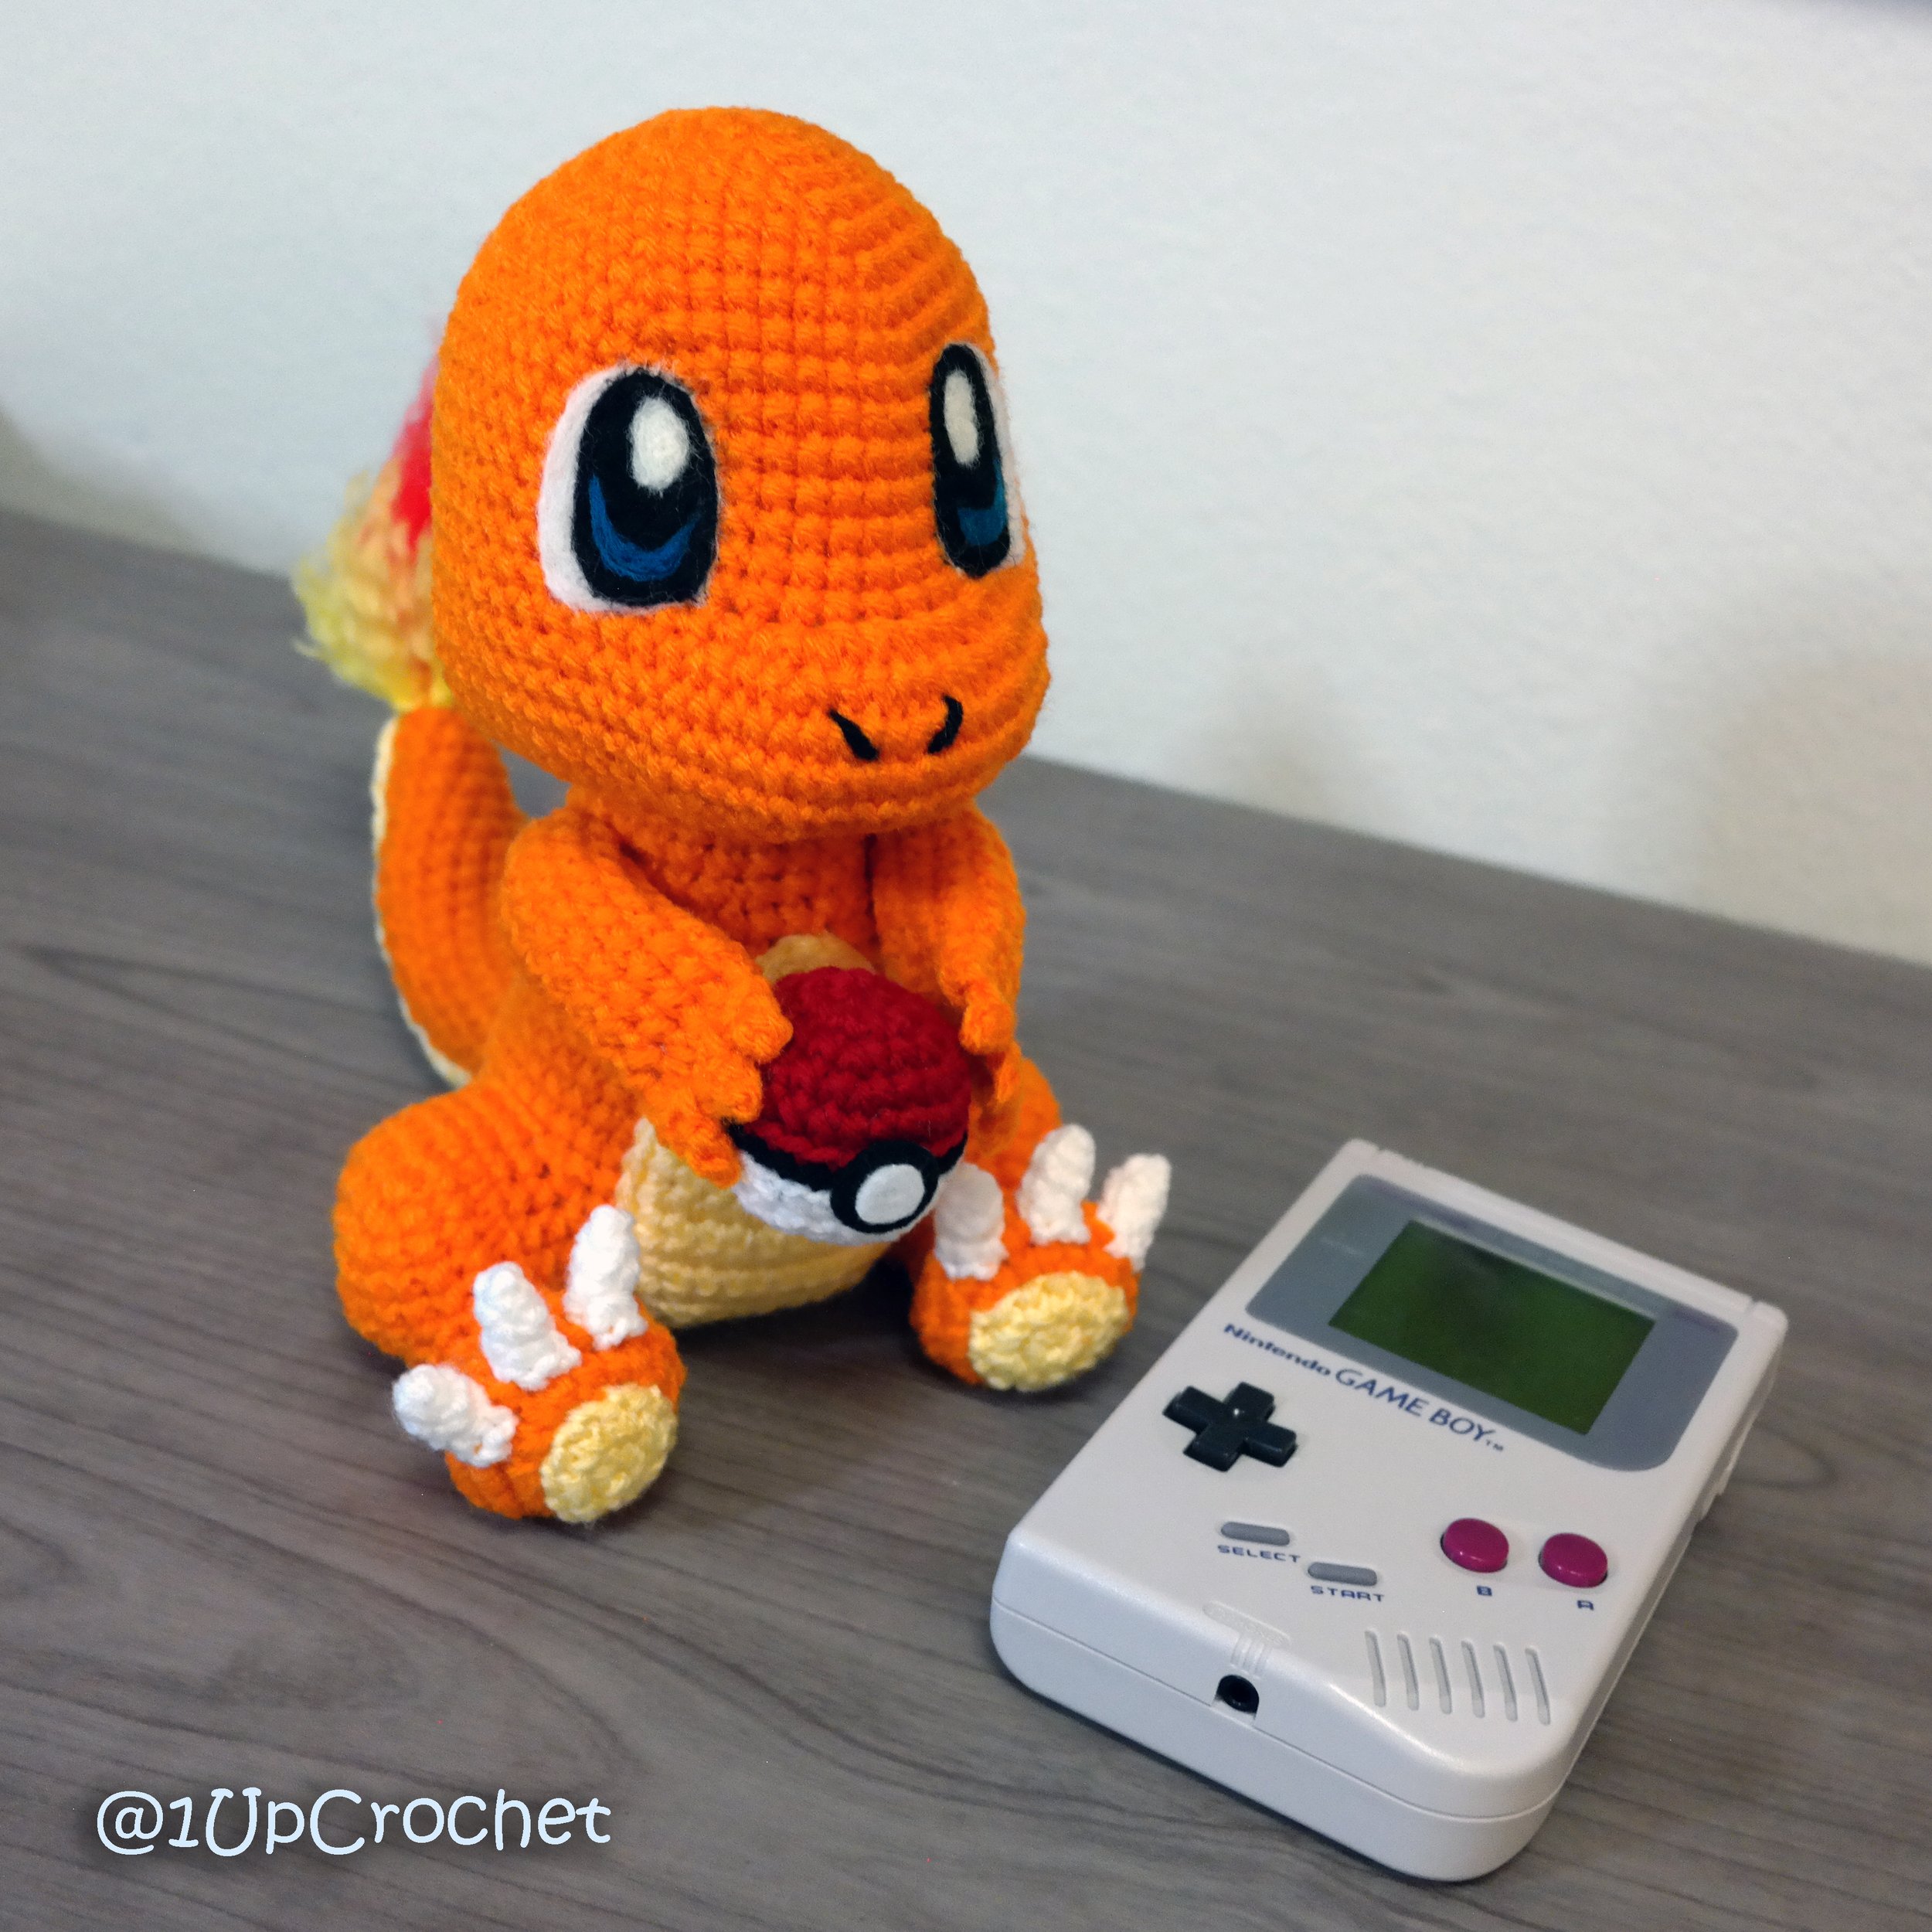 Here comes the boyyy. Here we have the classic starter boi Charmander  crochet using a specific glow in the dark yarn as well as a sweep of glow  in the dark powder. 